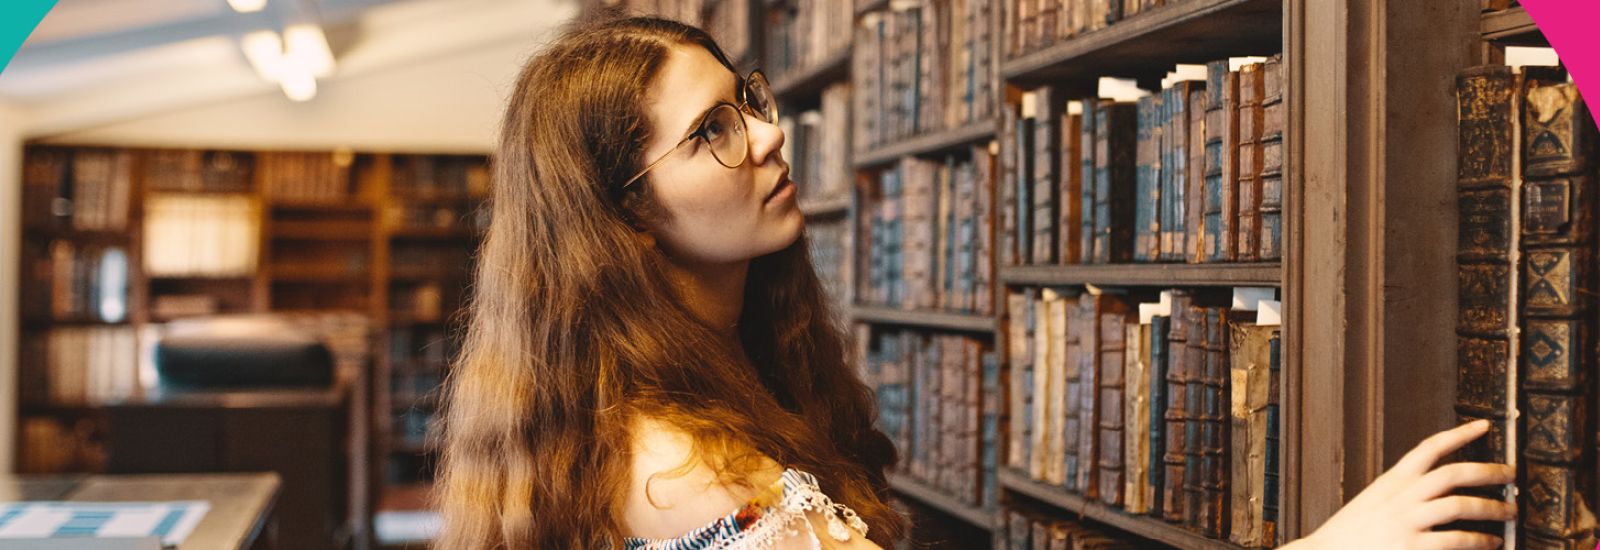 An intern looking at books on a shelf